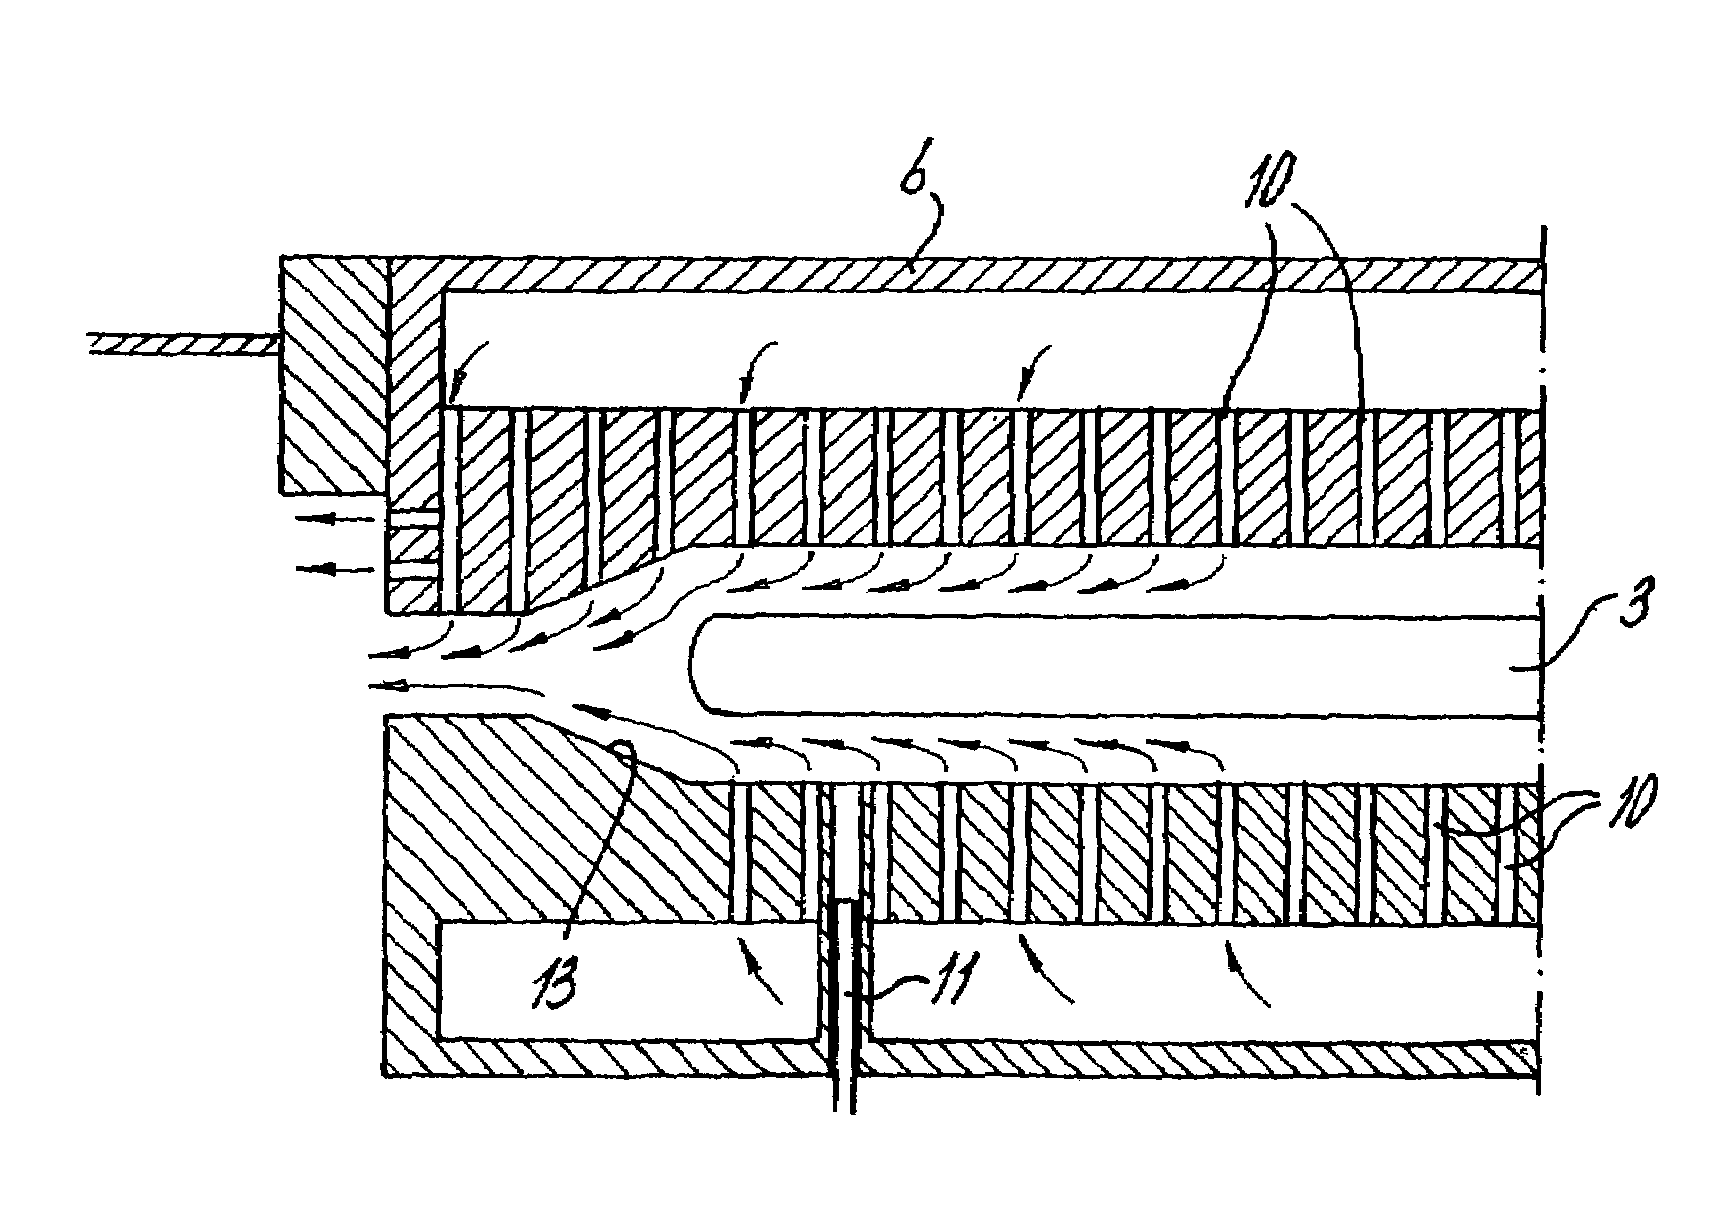 Method and apparatus for supporting a semiconductor wafer during processing